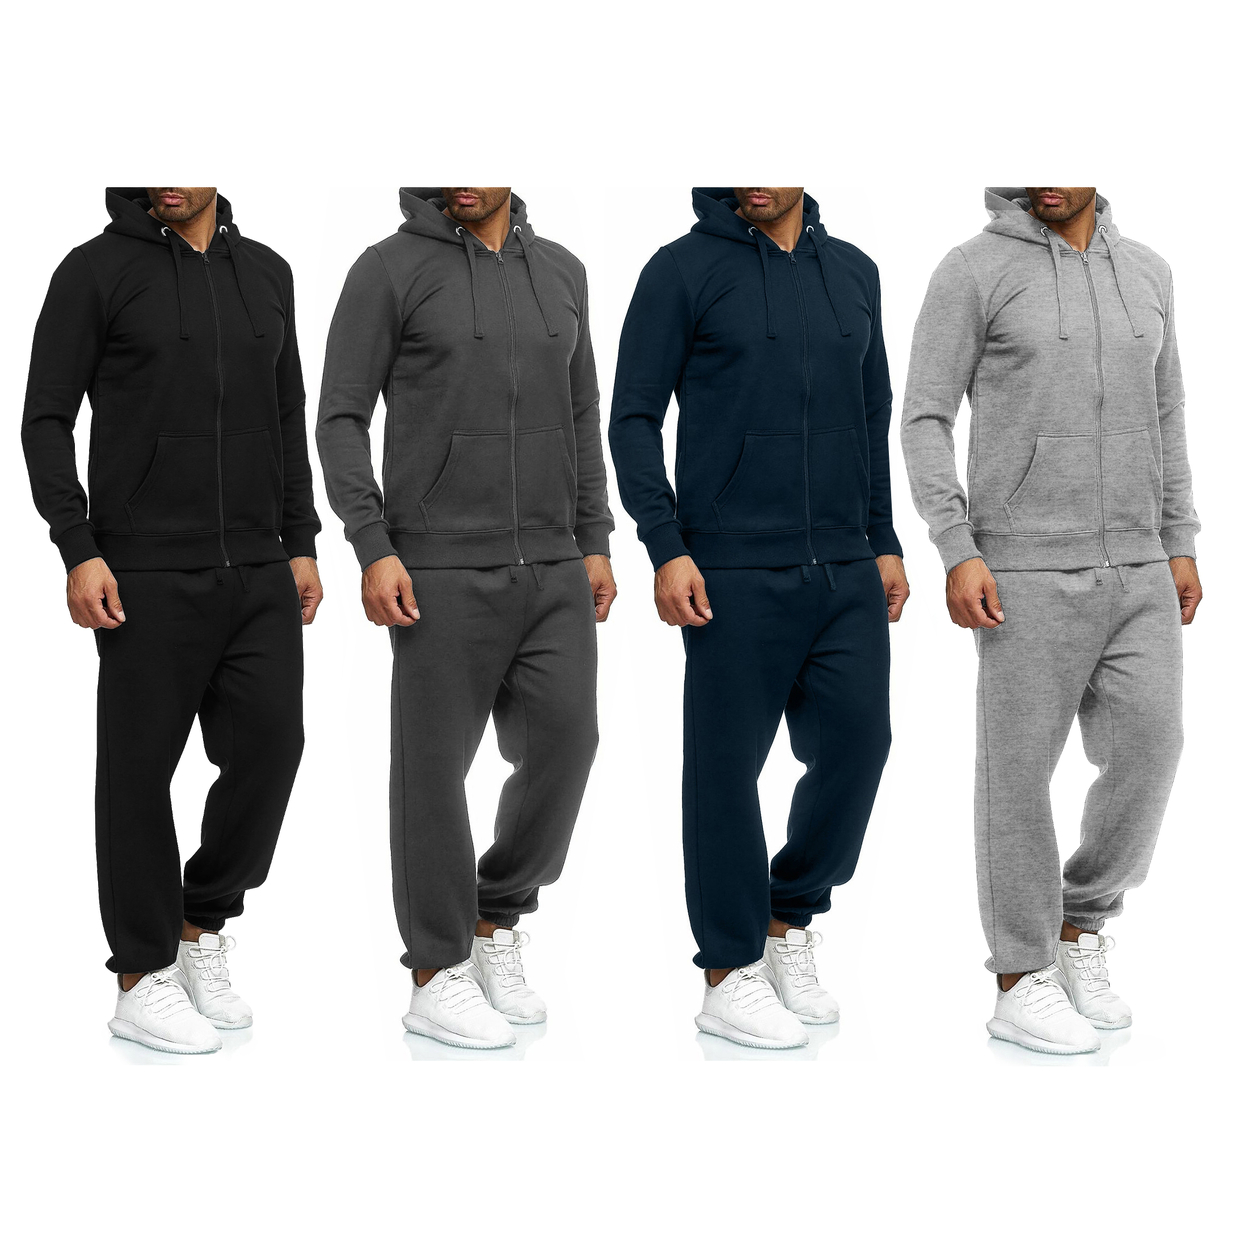 Multi-Pack: Men's Casual Big & Tall Athletic Active Winter Warm Fleece Lined Full Zip Tracksuit Jogger Set - Black, 1-pack, X-large